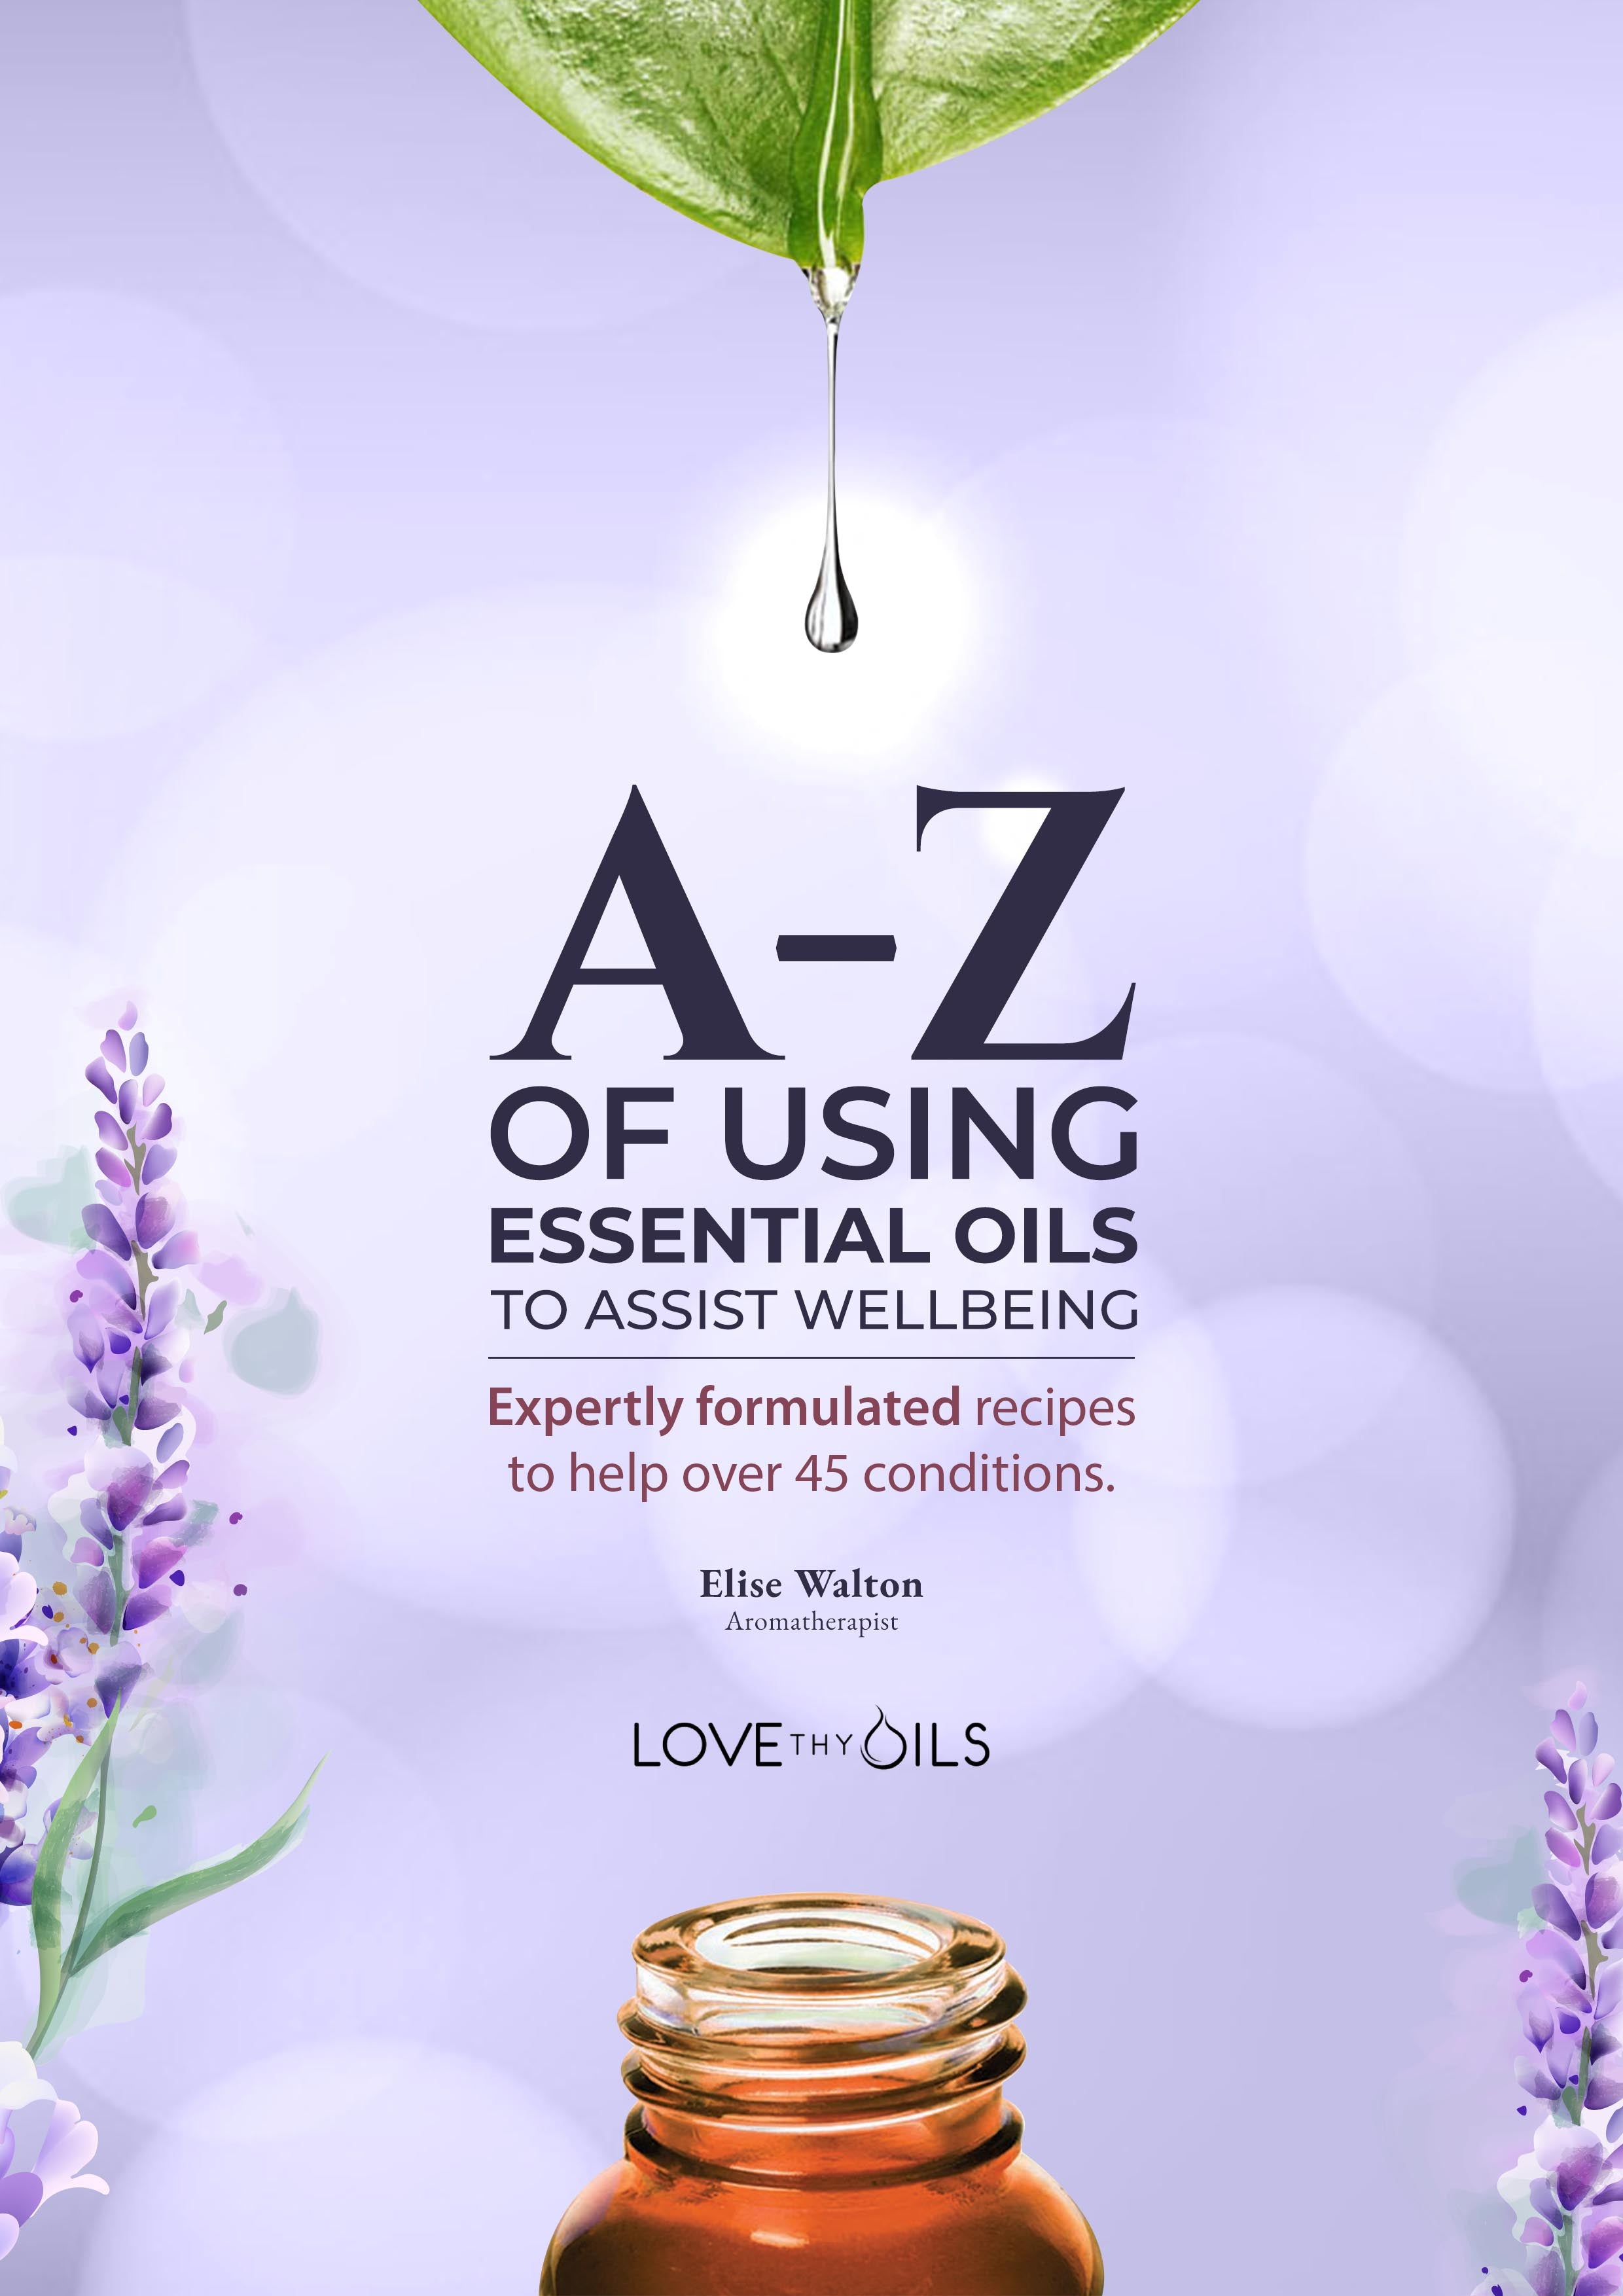 Aromatherapy book download essential oil recipes